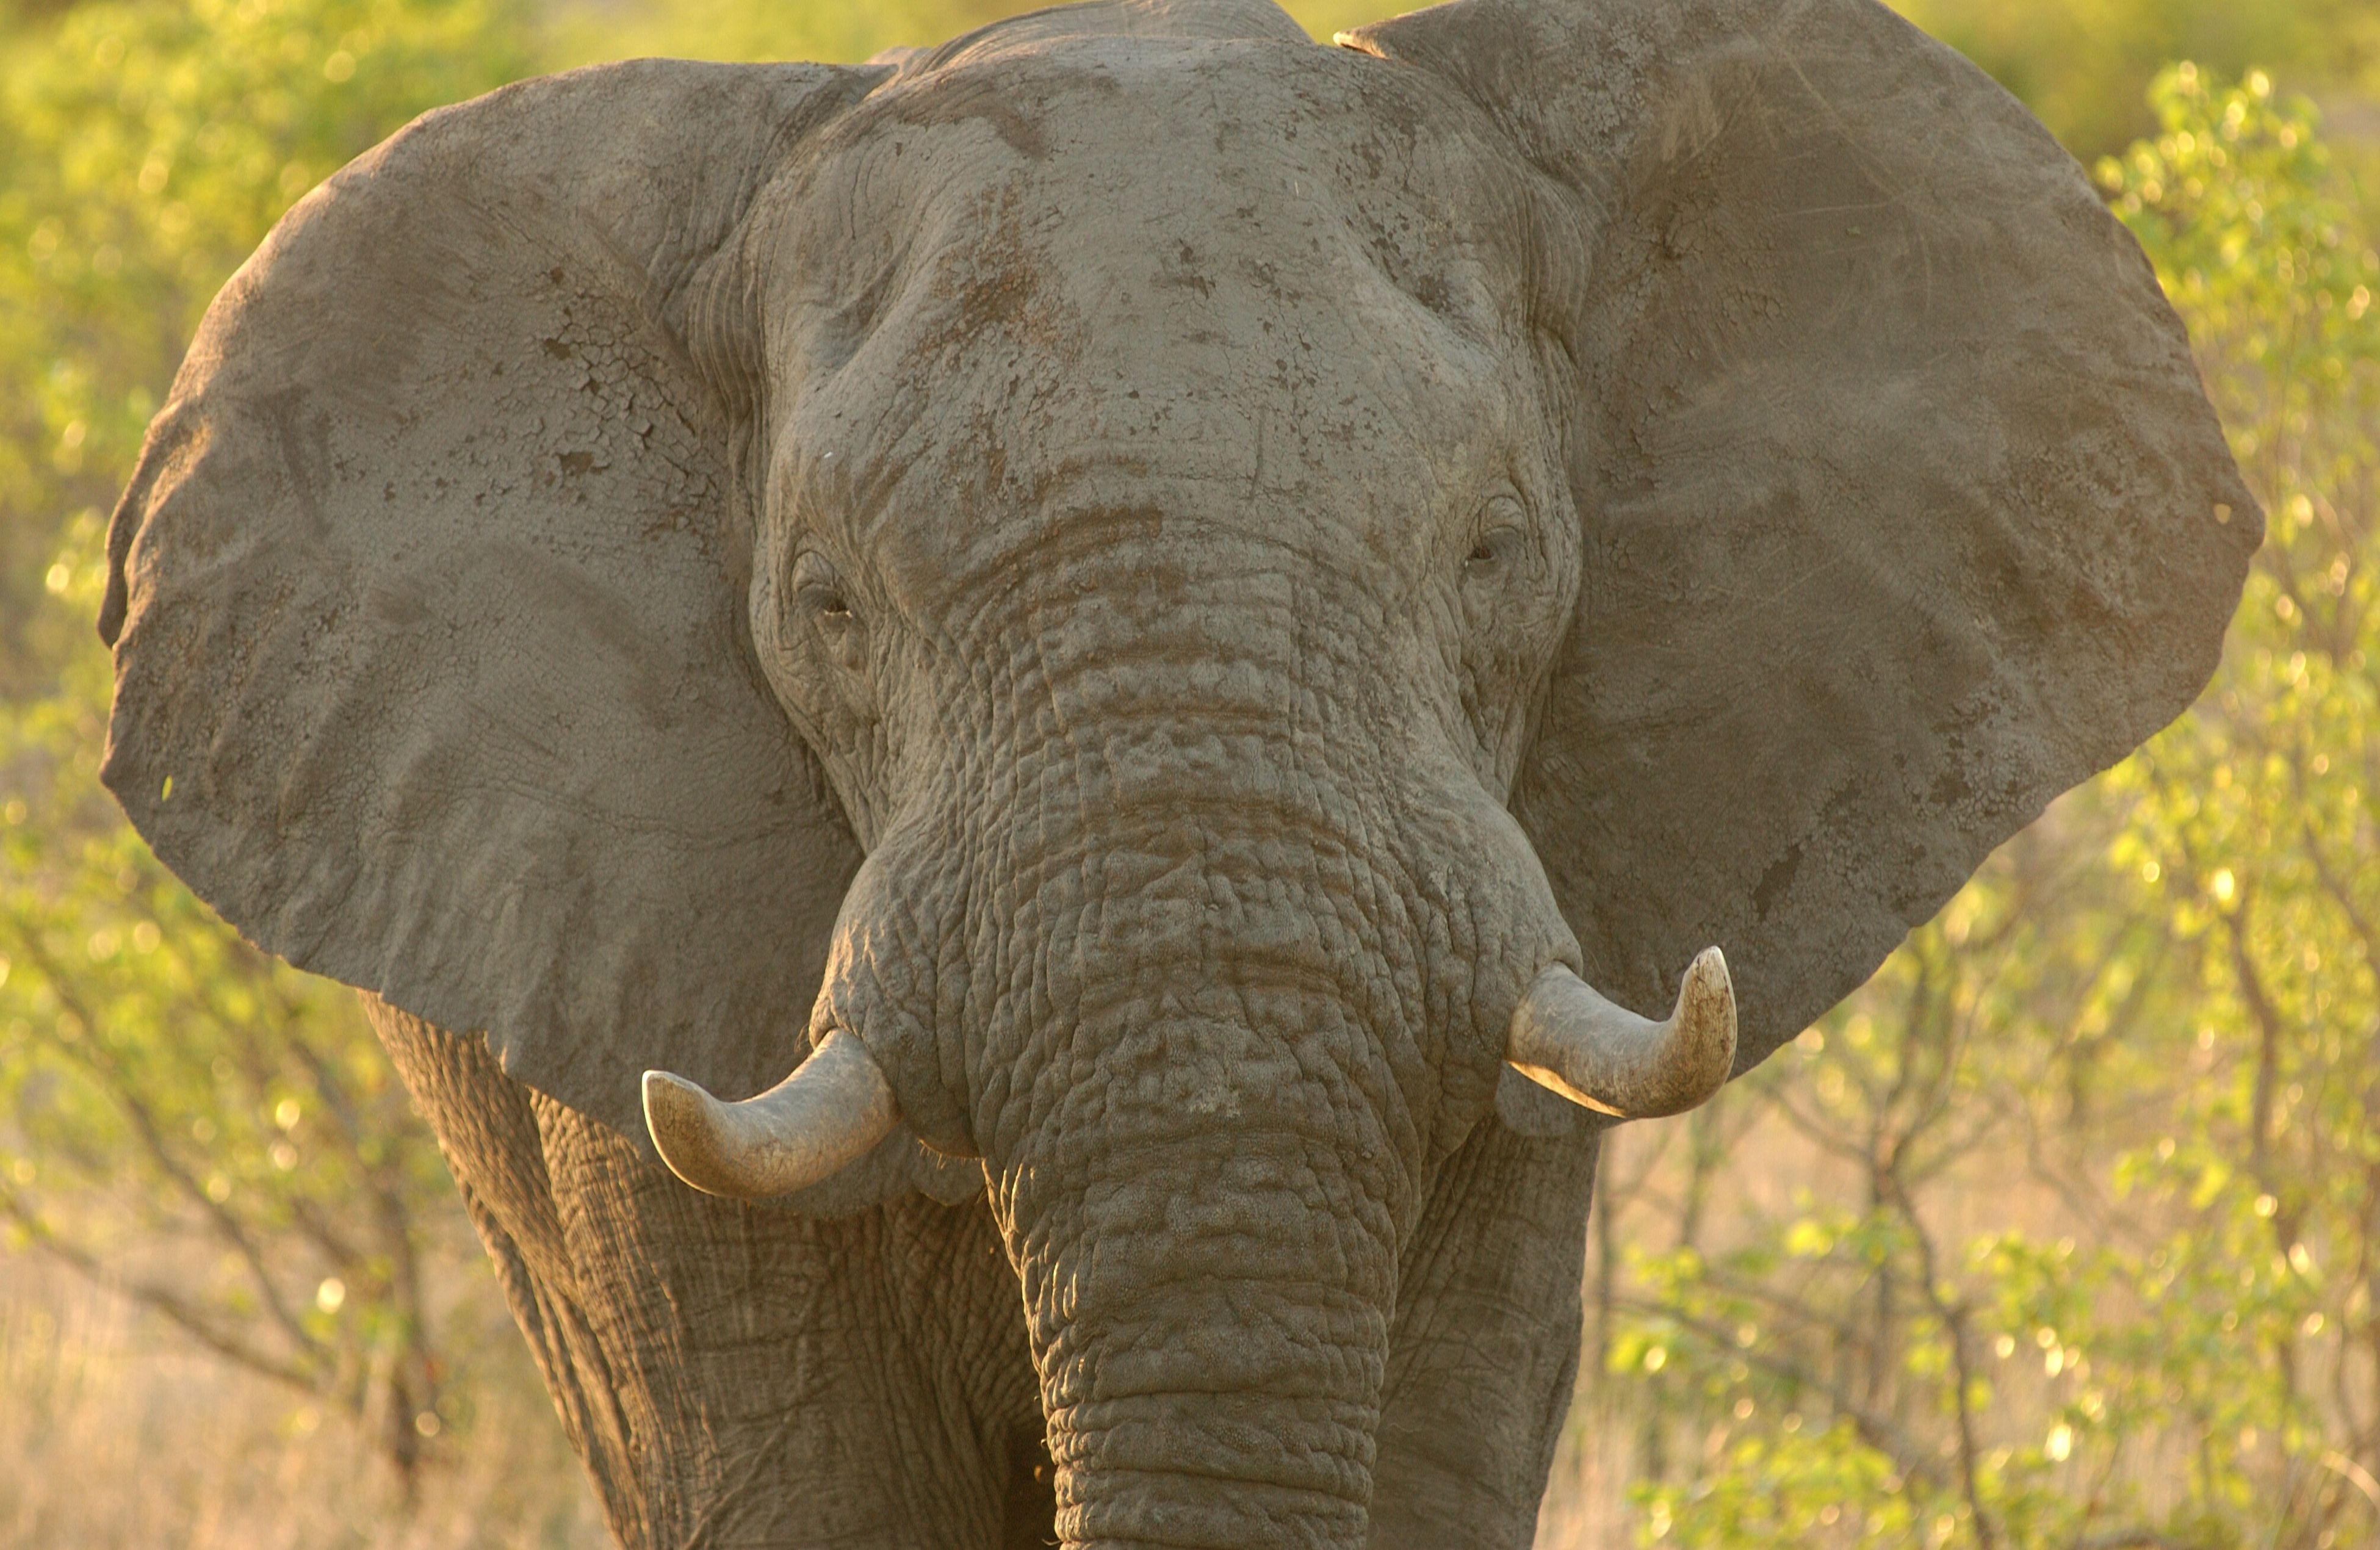 Even though an elephant’s bladder is 3,600 times larger than a cat’s (18 liters vs. 5 milliliters), both animals relieve themselves in about 20 seconds.